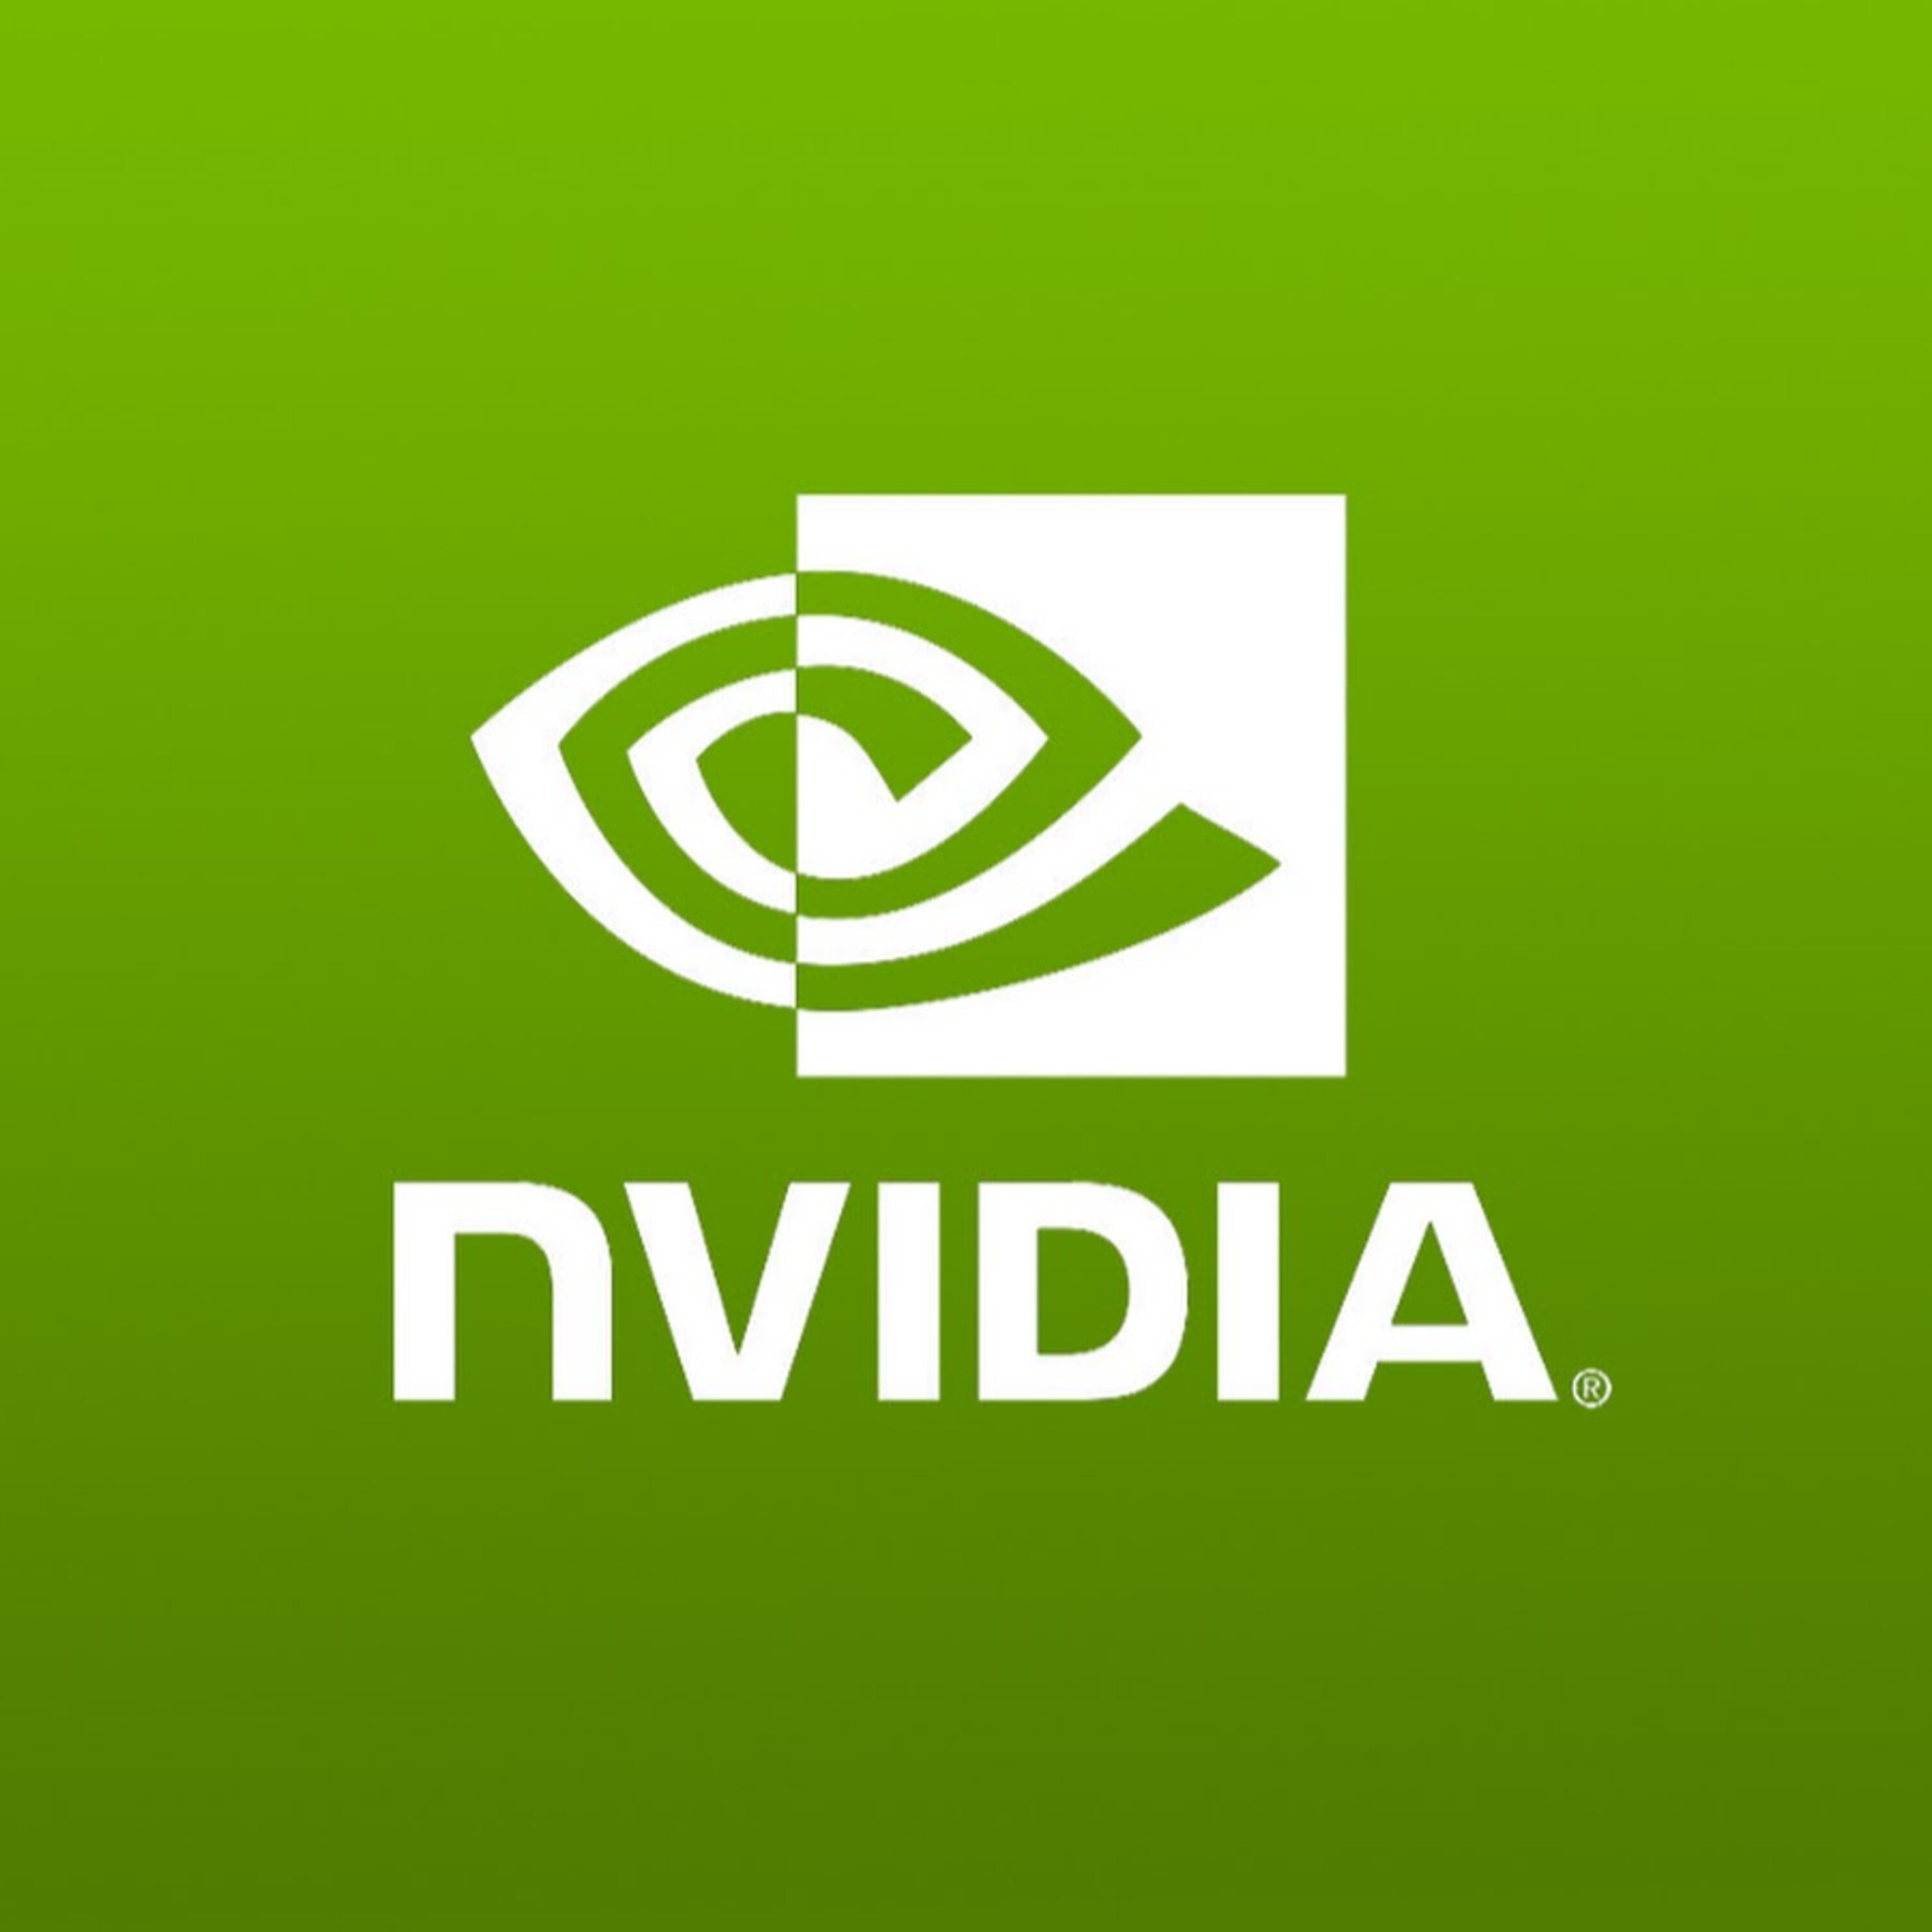 The Nvidia Earnings Blowout (PREVIEW)